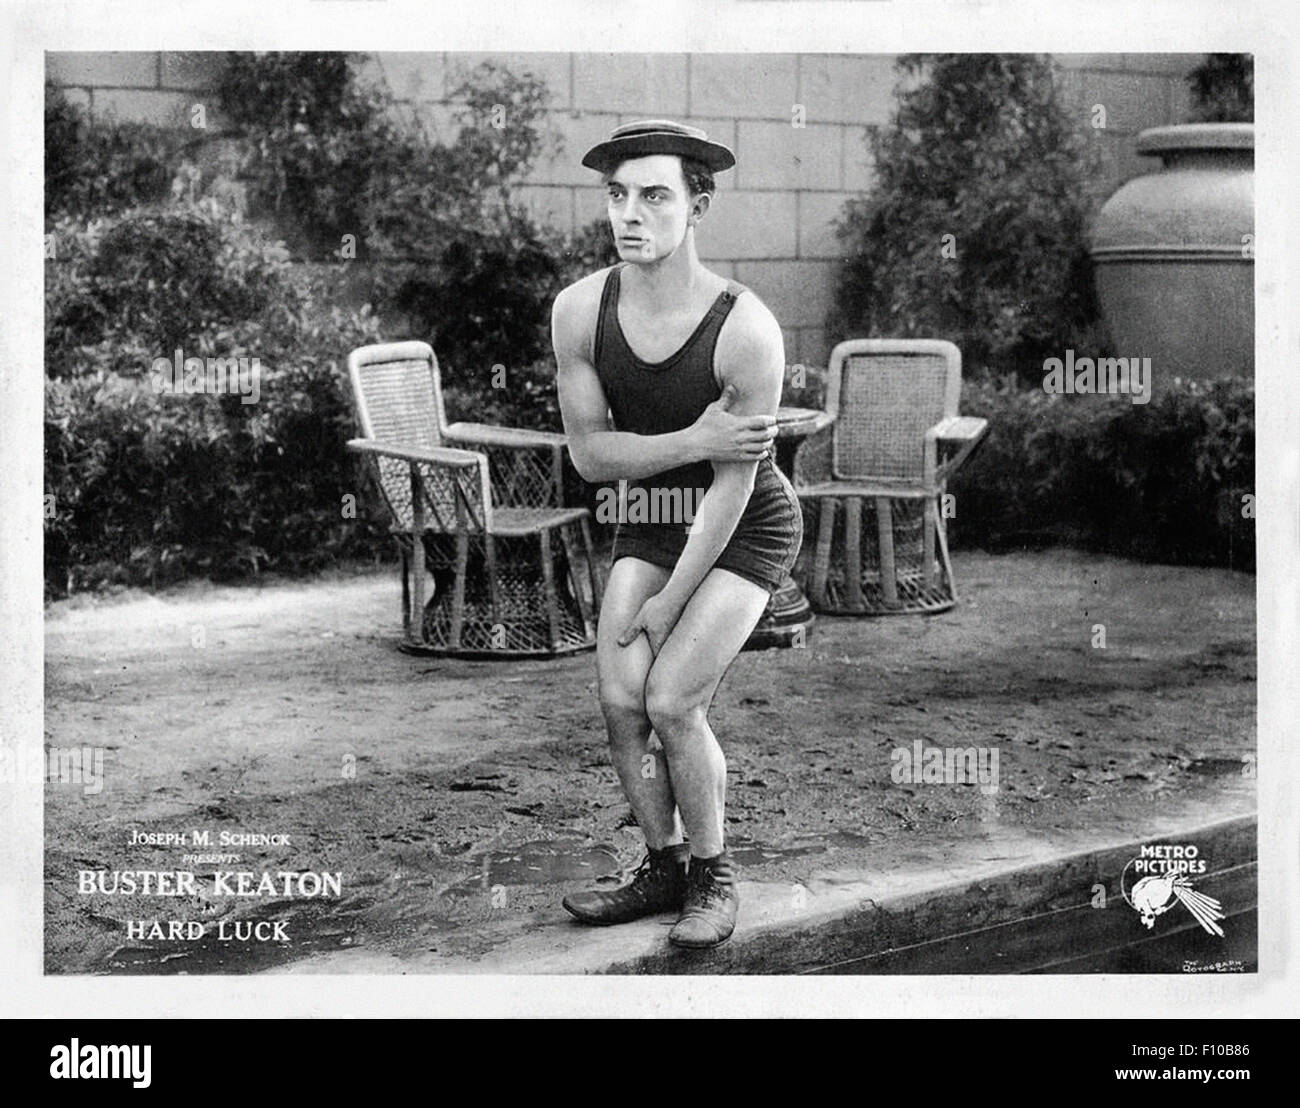 Buster Keaton High Resolution Stock Photography and Images - Alamy